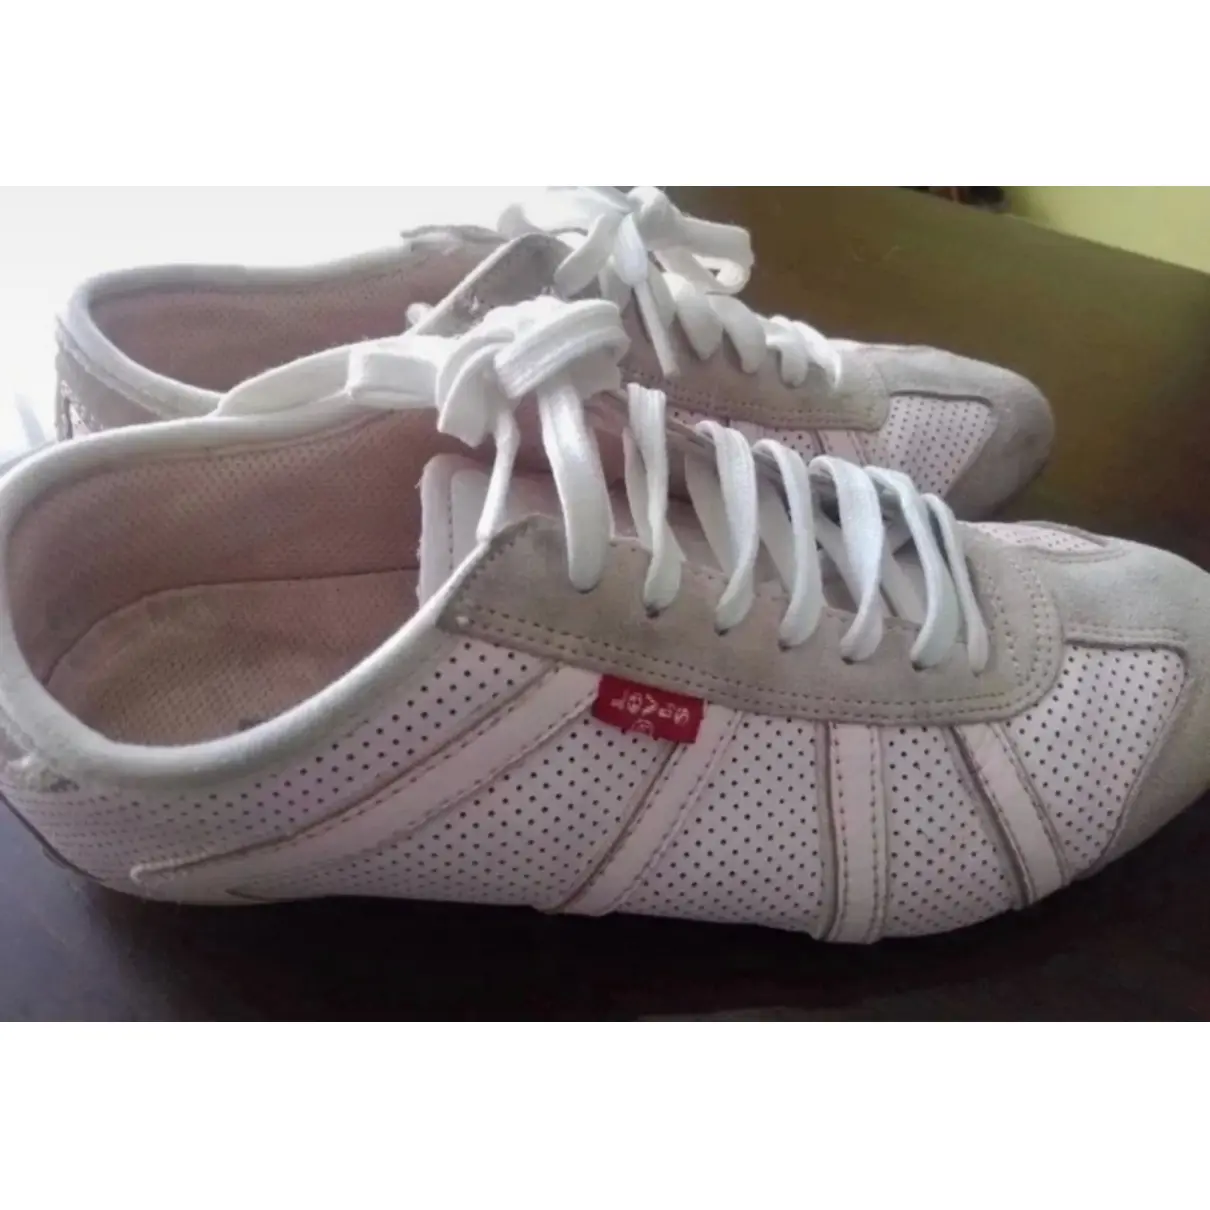 Buy Levi's Leather trainers online - Vintage